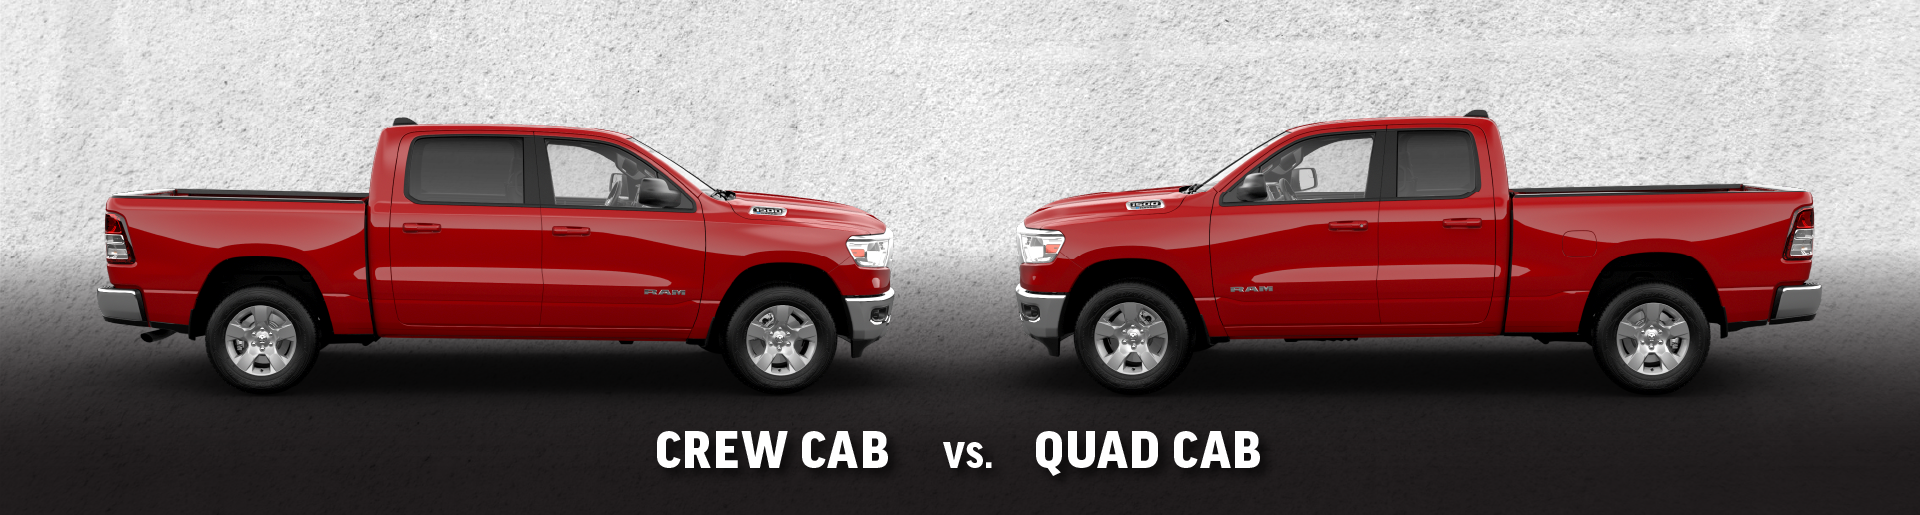 What's The Difference Between Ram Mega Cab And Ram Crew Cab?